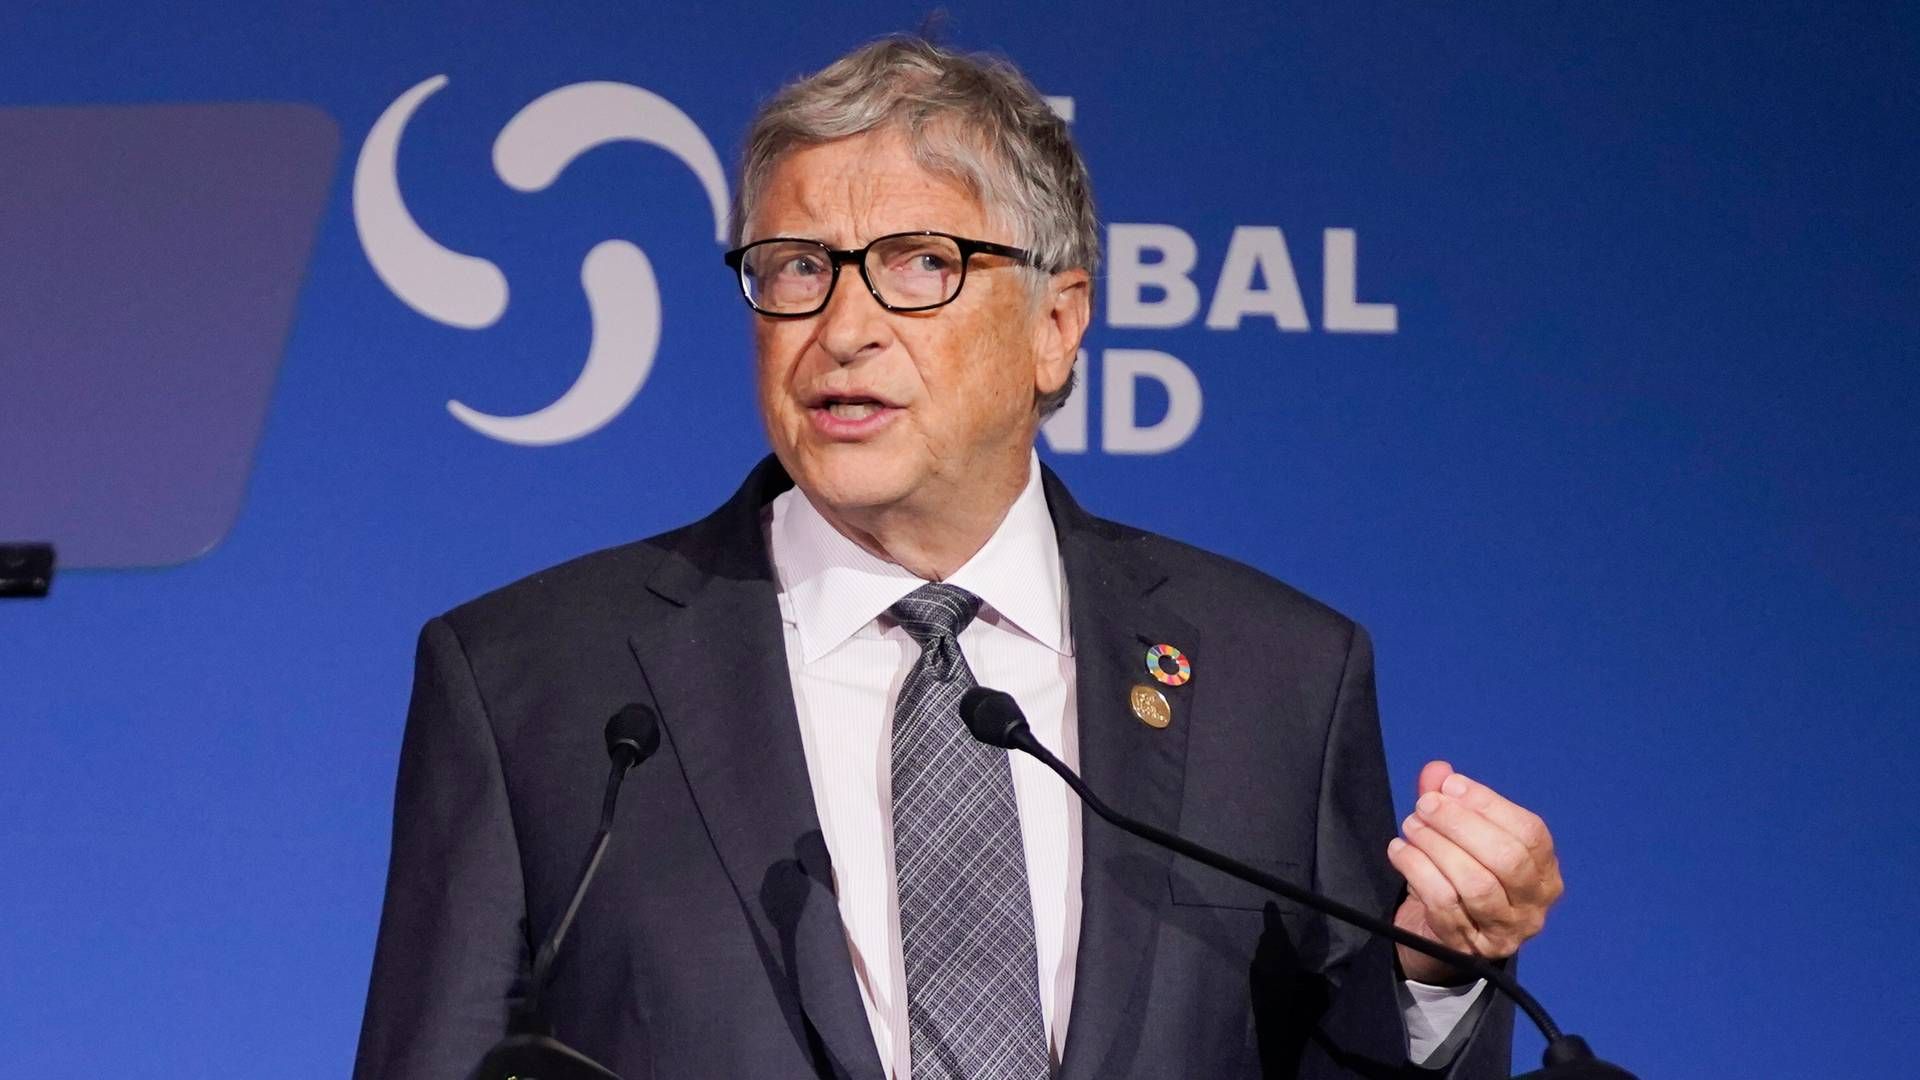 Bill Gates, founder of Microsoft and the co-founder of the Bill & Melinda Gates Foundation